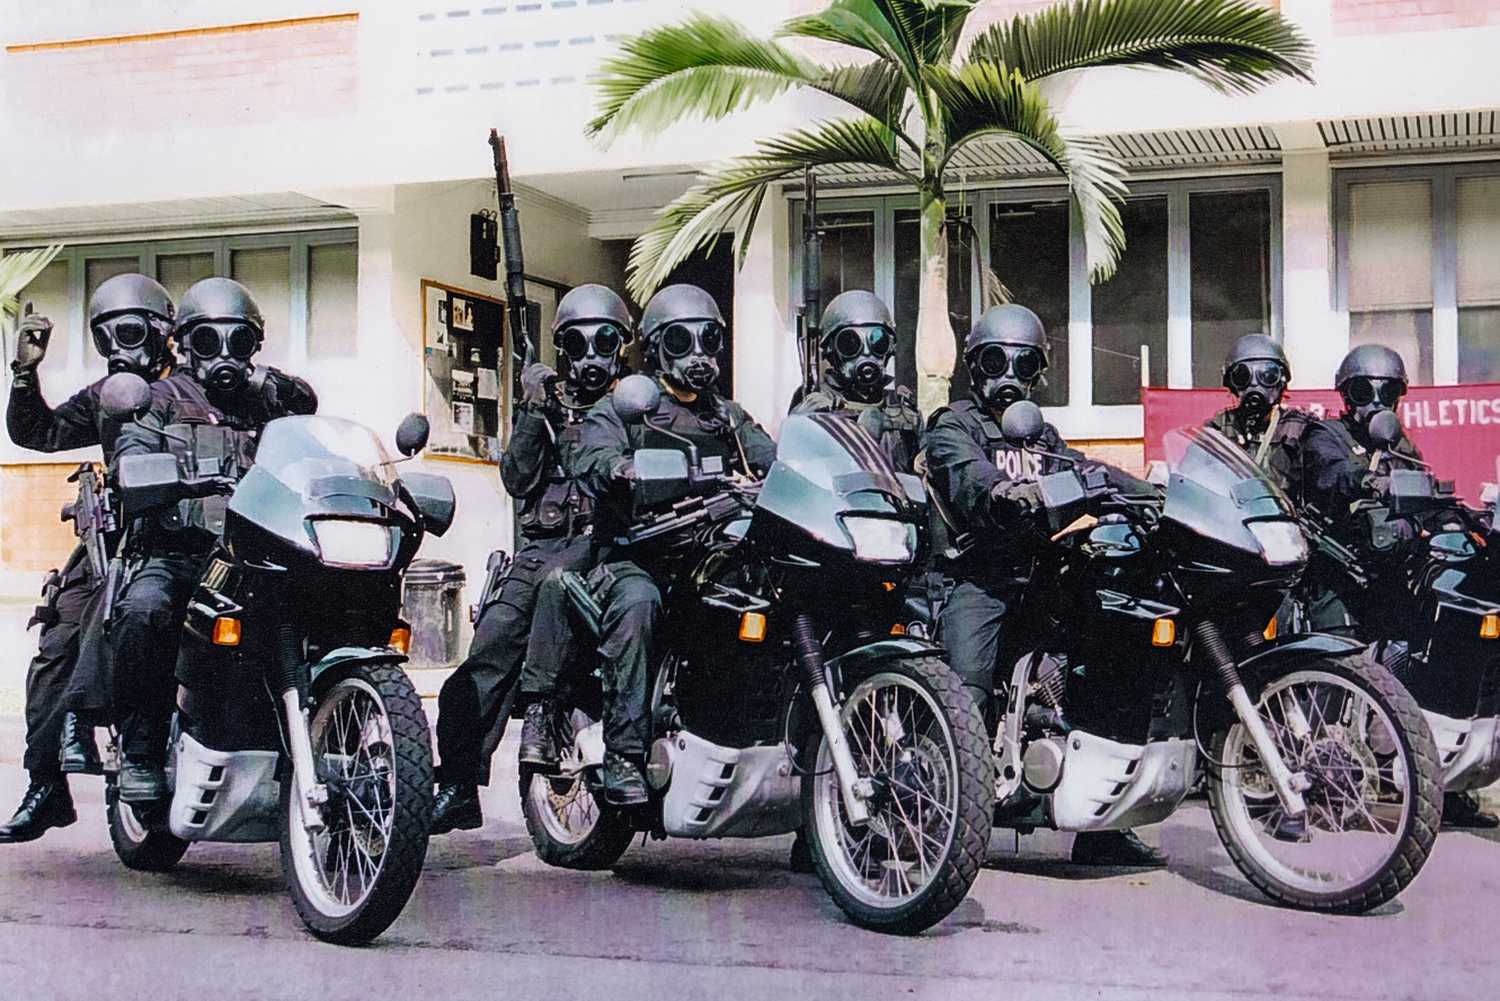 A group of police officers on motorcycles